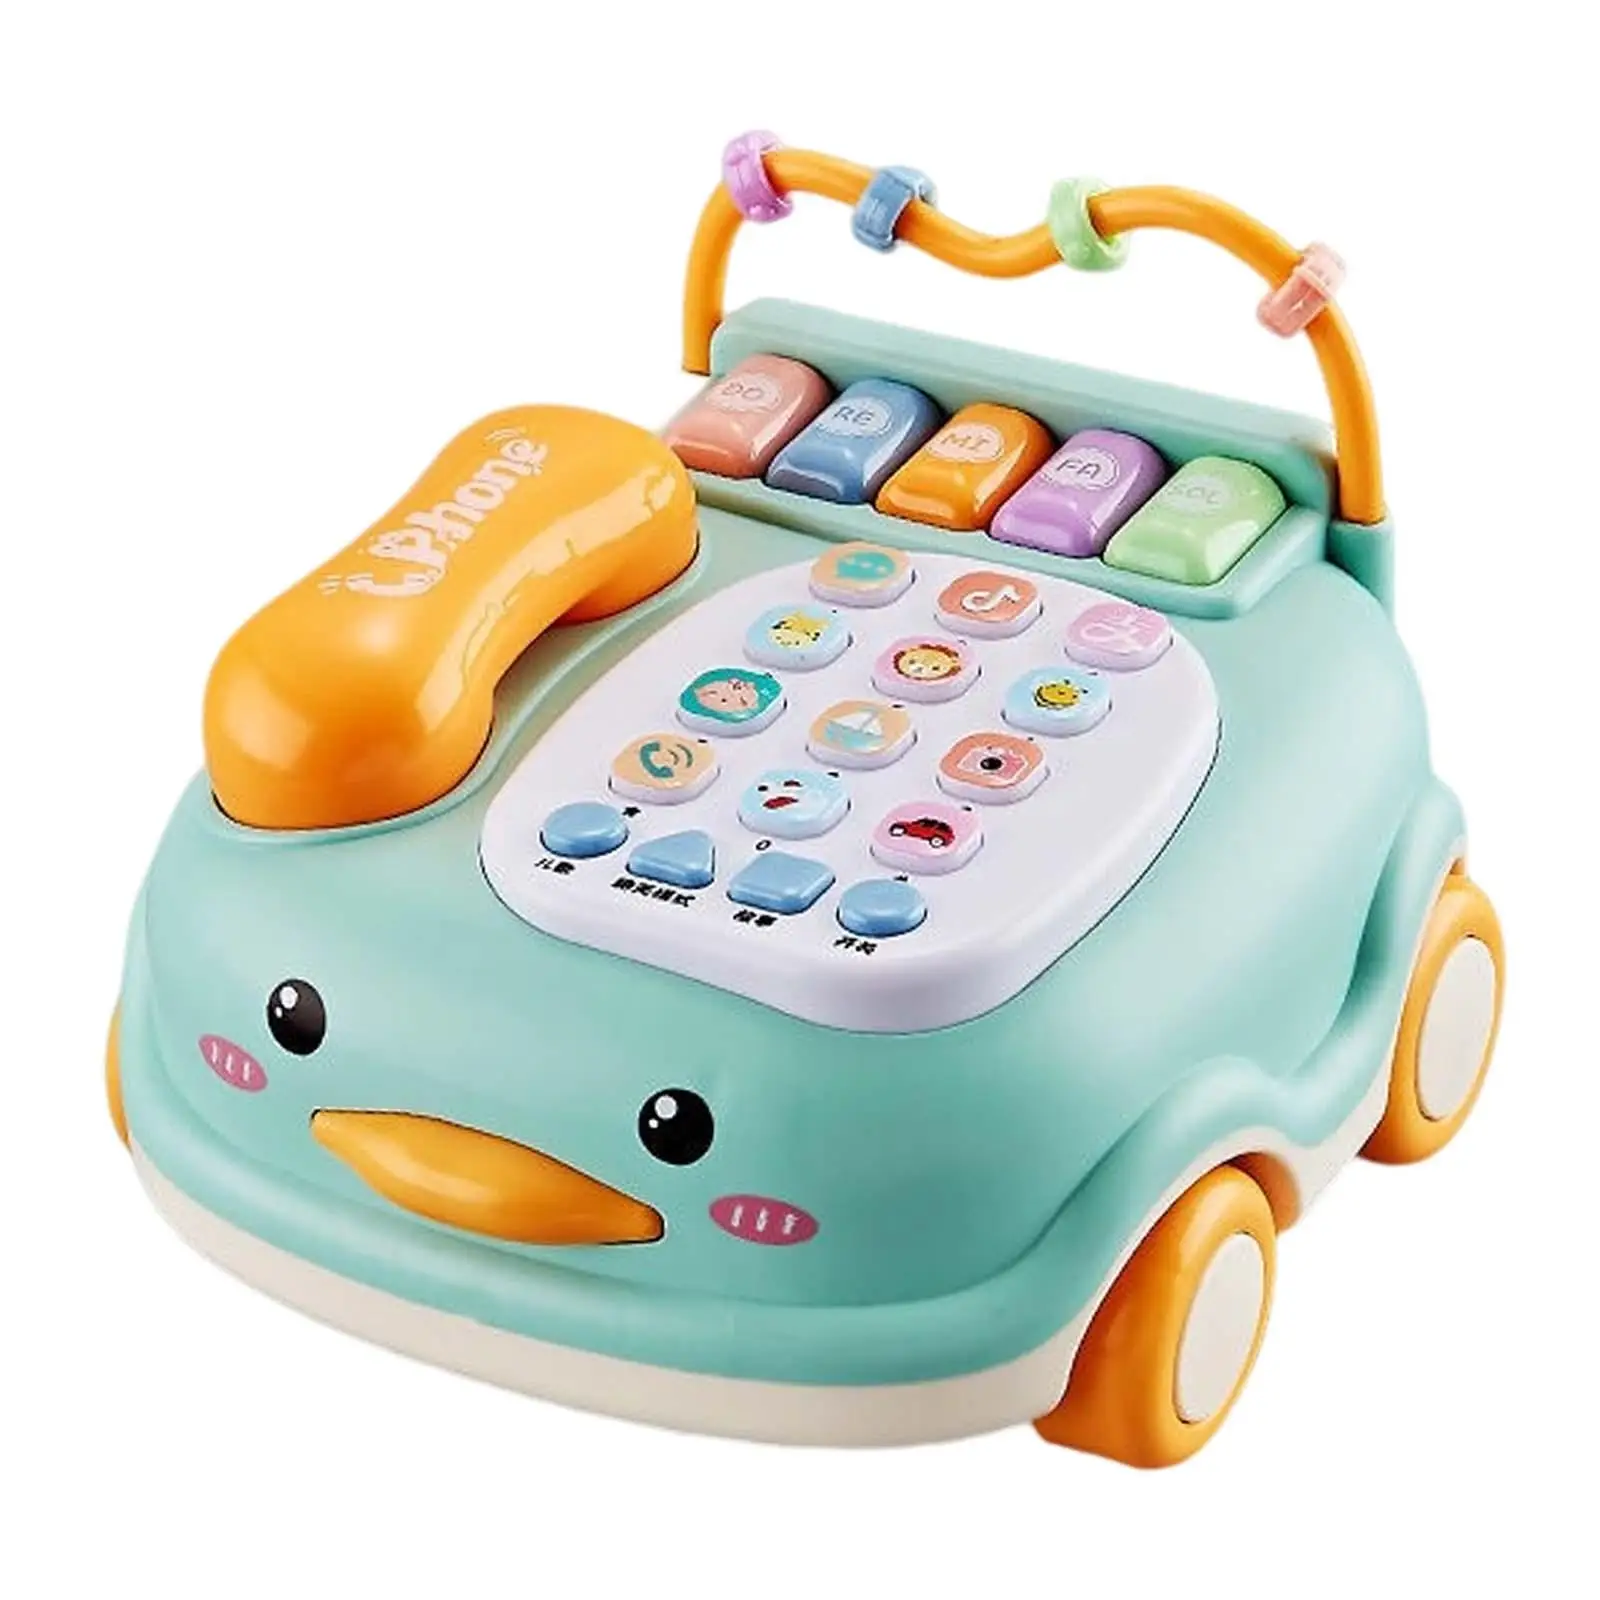 Baby Educational Learning Toy Pretend Phone Cognitive Development Toy Baby Toy Phone for Creative Gift Children 3 Years Old Girl